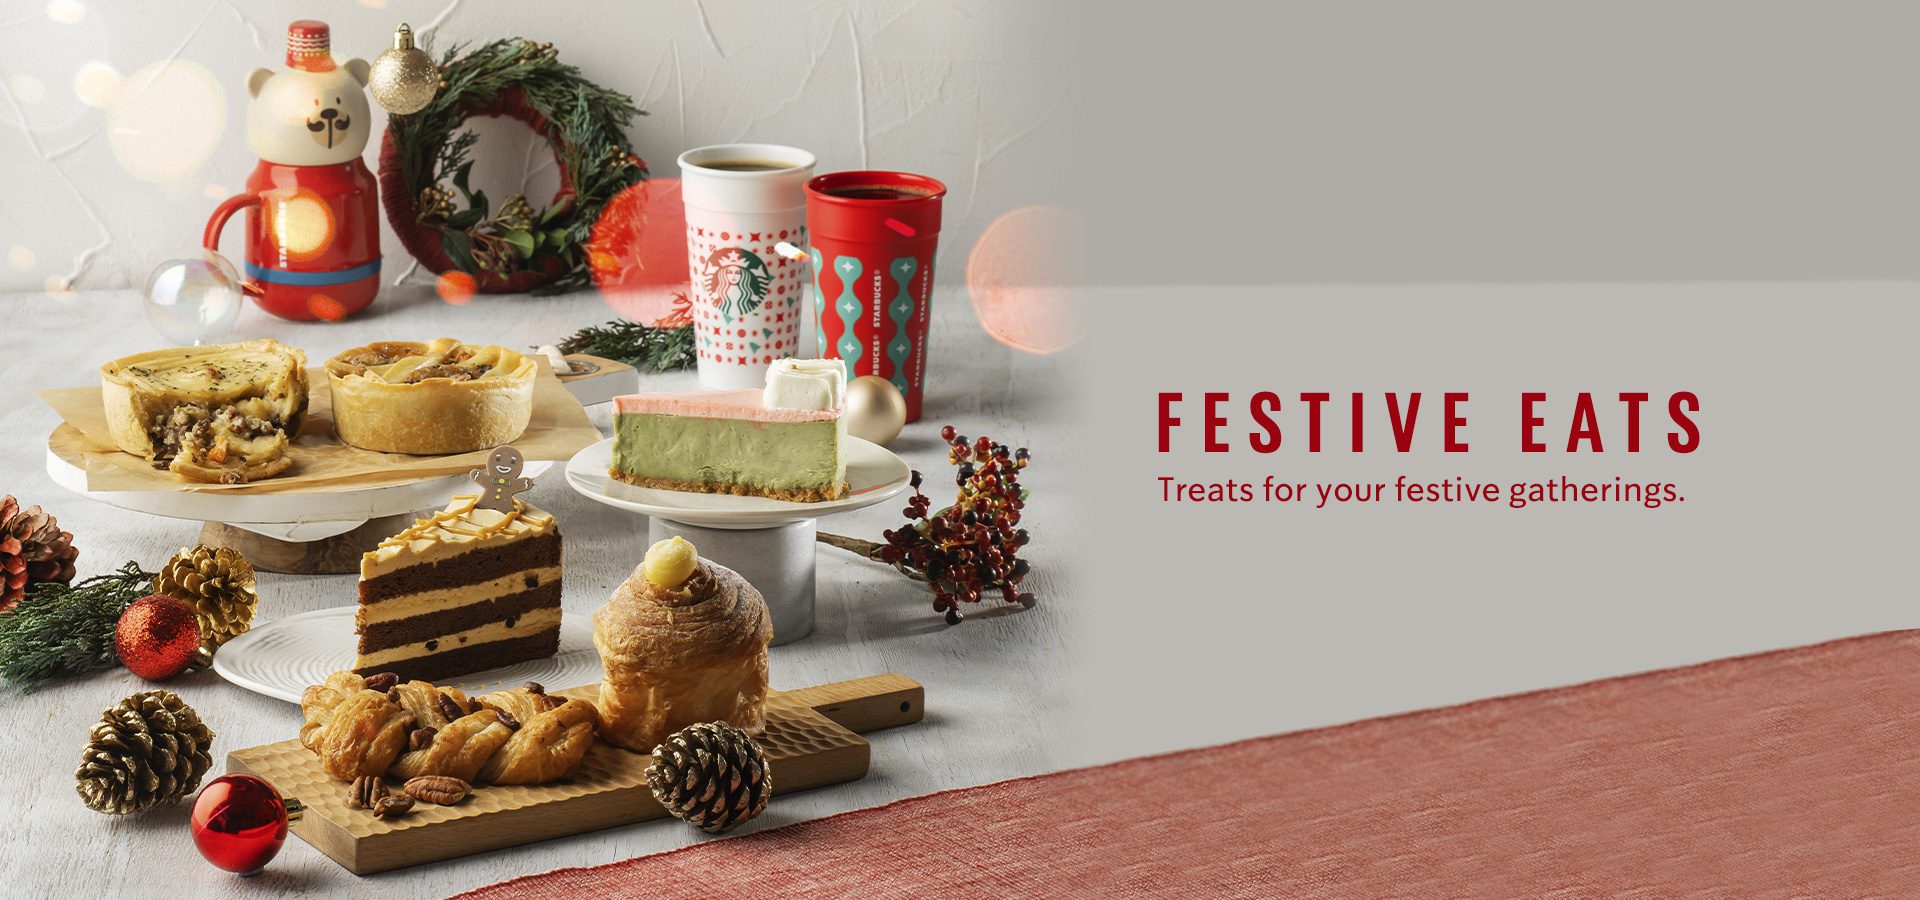 Brighten Your Holidays with Starbucks® Comforting All-Time Festive Favorites! featured image